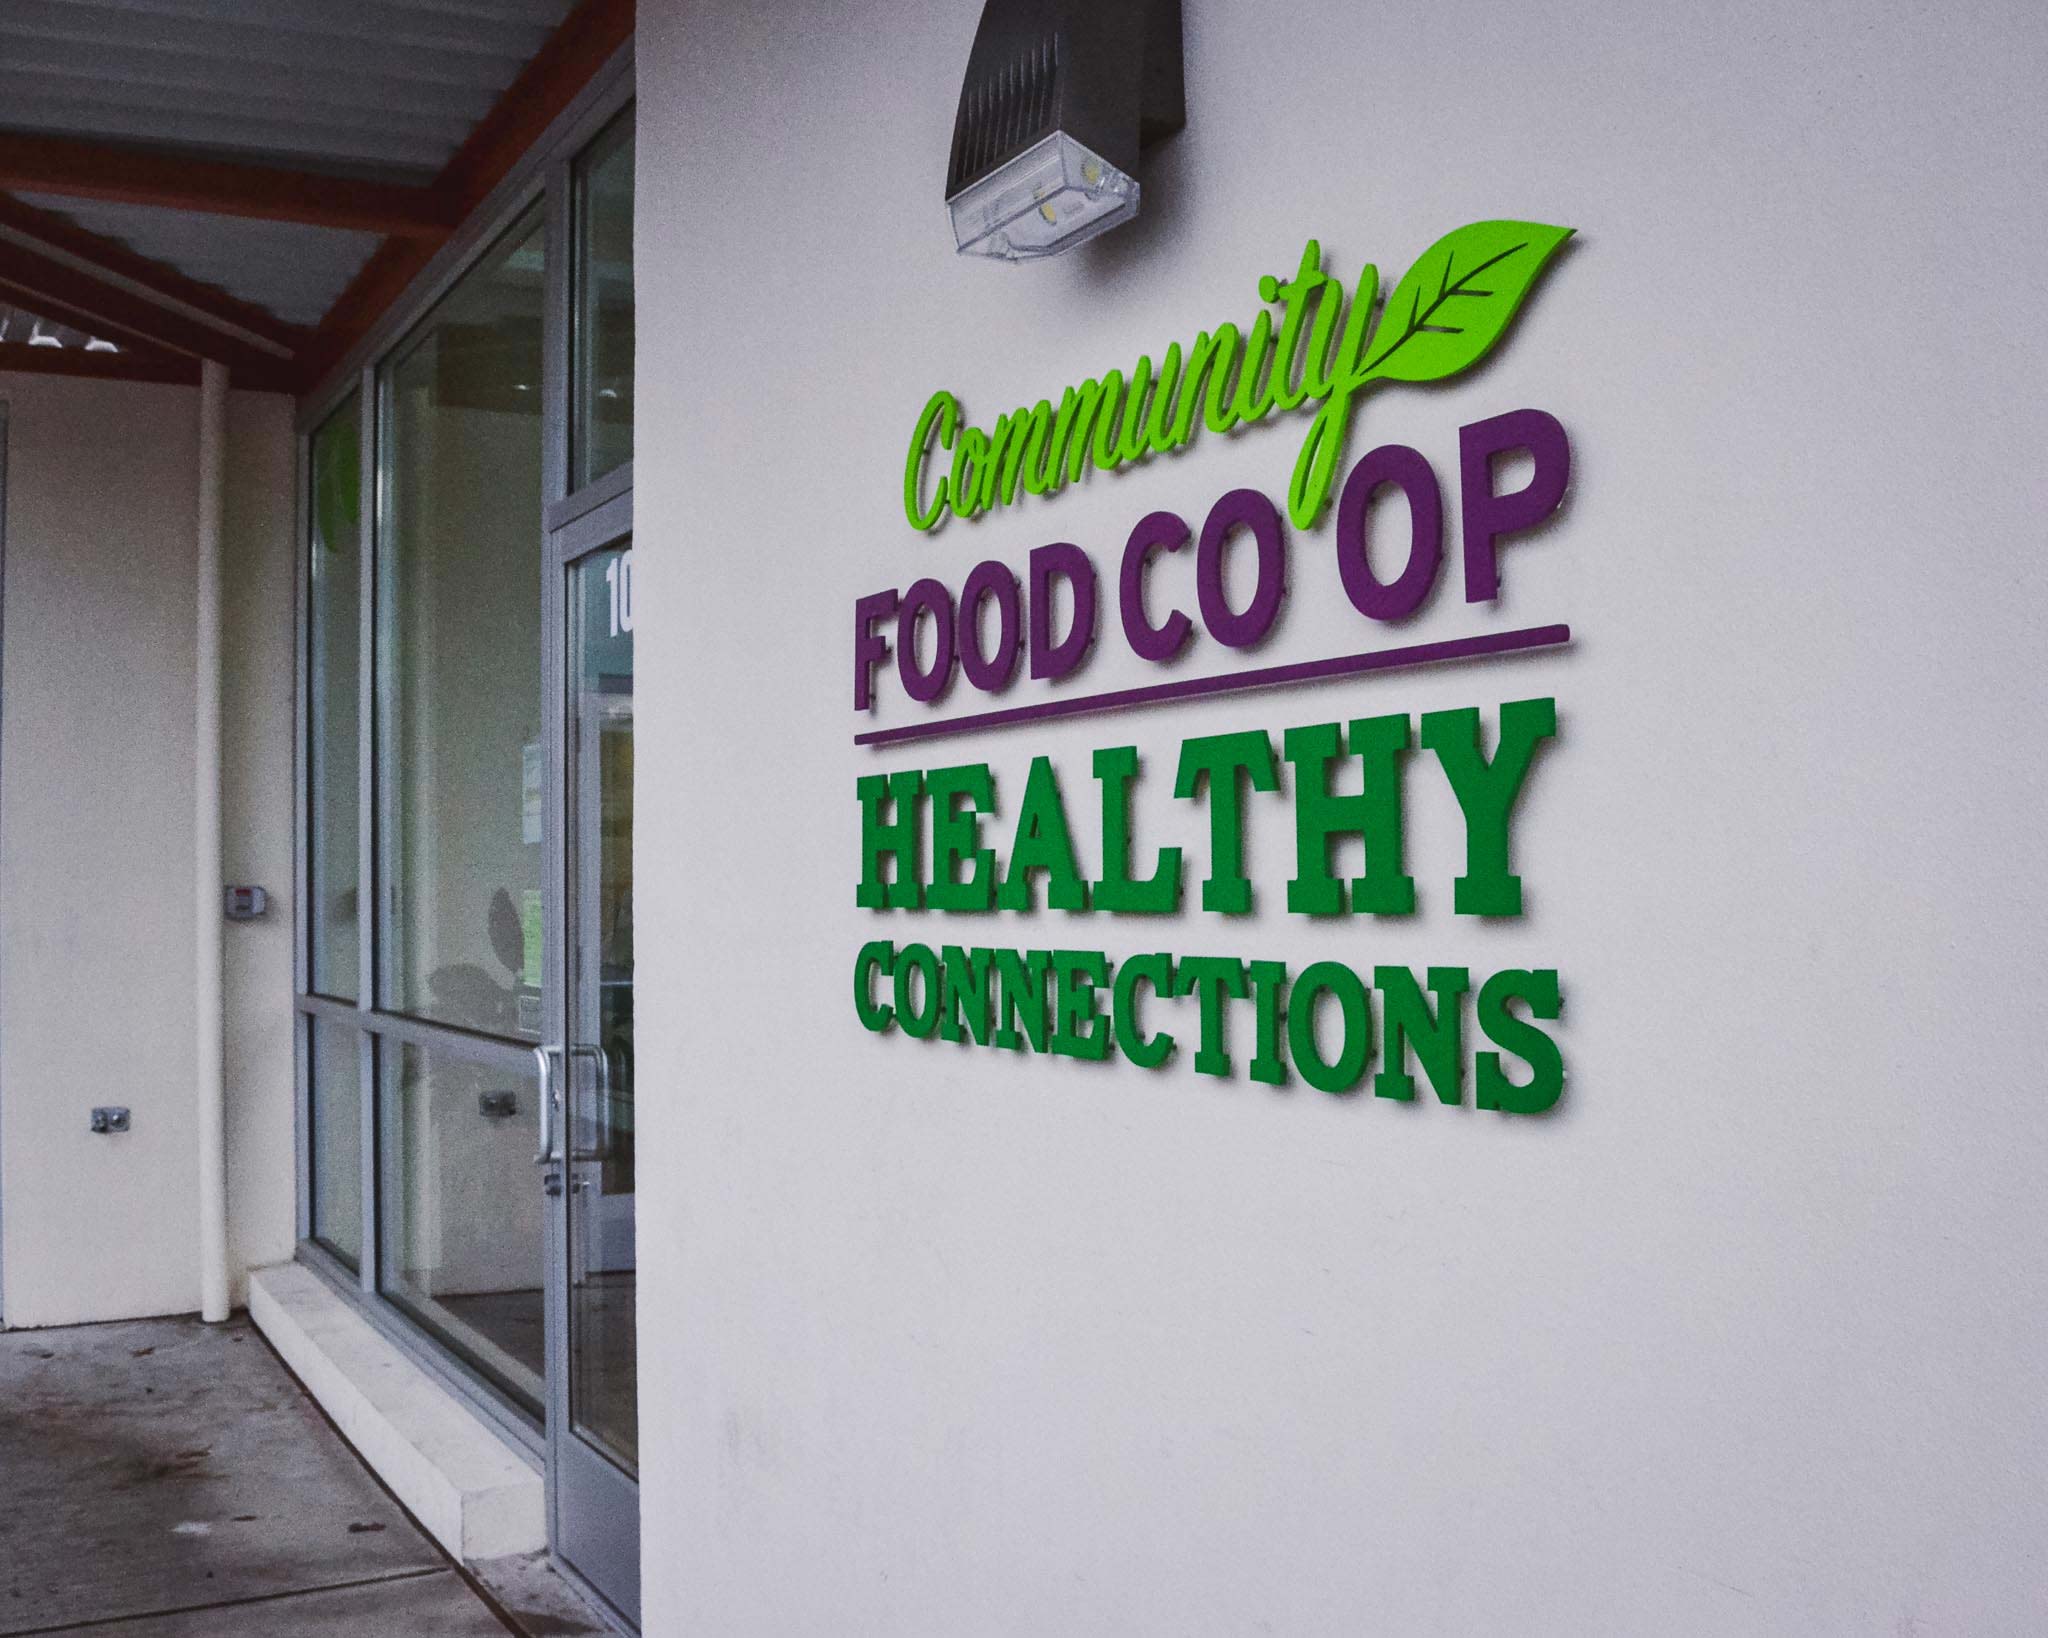 grocery-community-food-co-op-dimensional-nonilluminated-letter-sign